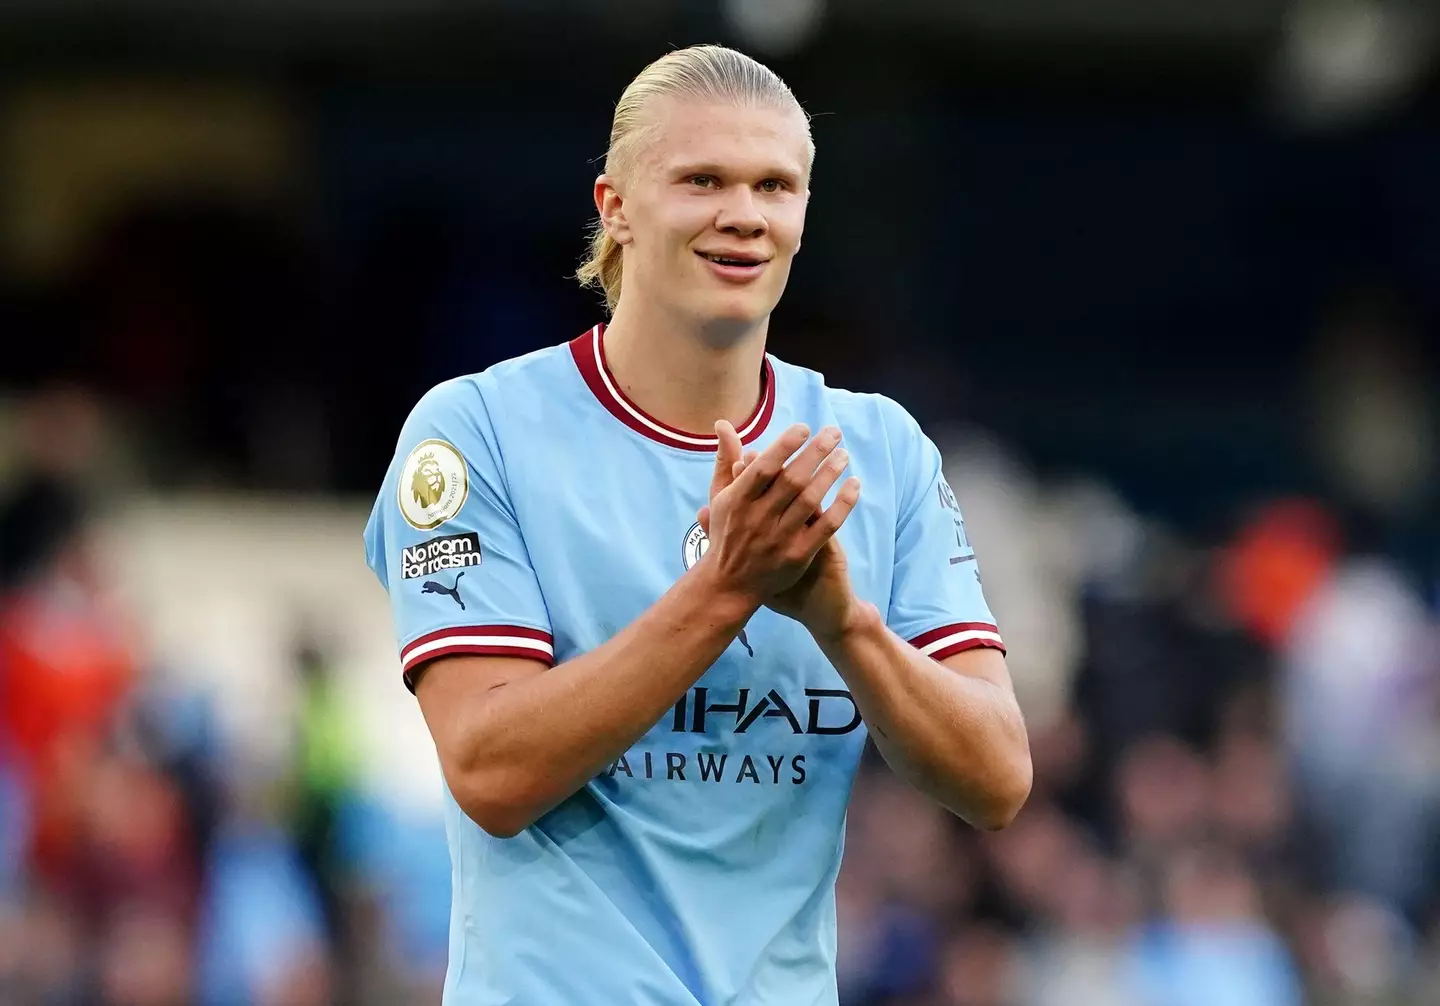 Manchester City striker Erling Haaland lit up the Premier League since his transfer from Borussia Dortmund.